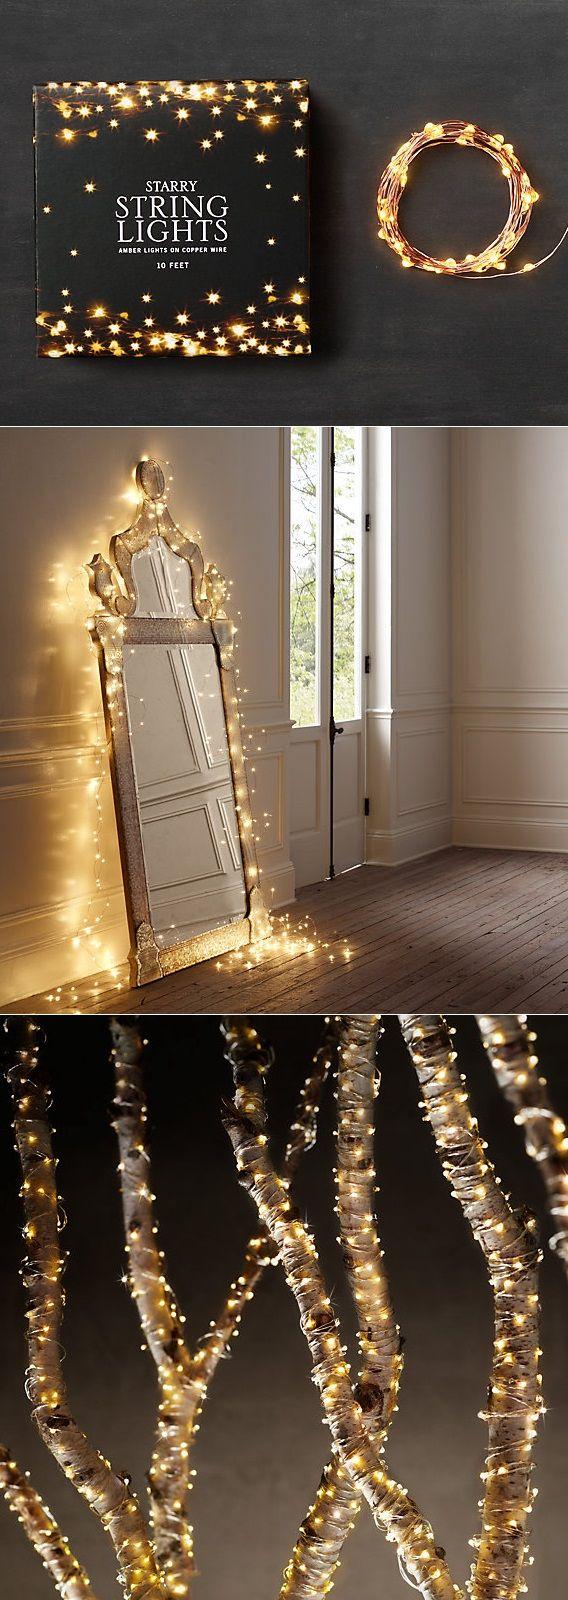 Wedding - 18 Whimsical Ways To Decorate With String Lights